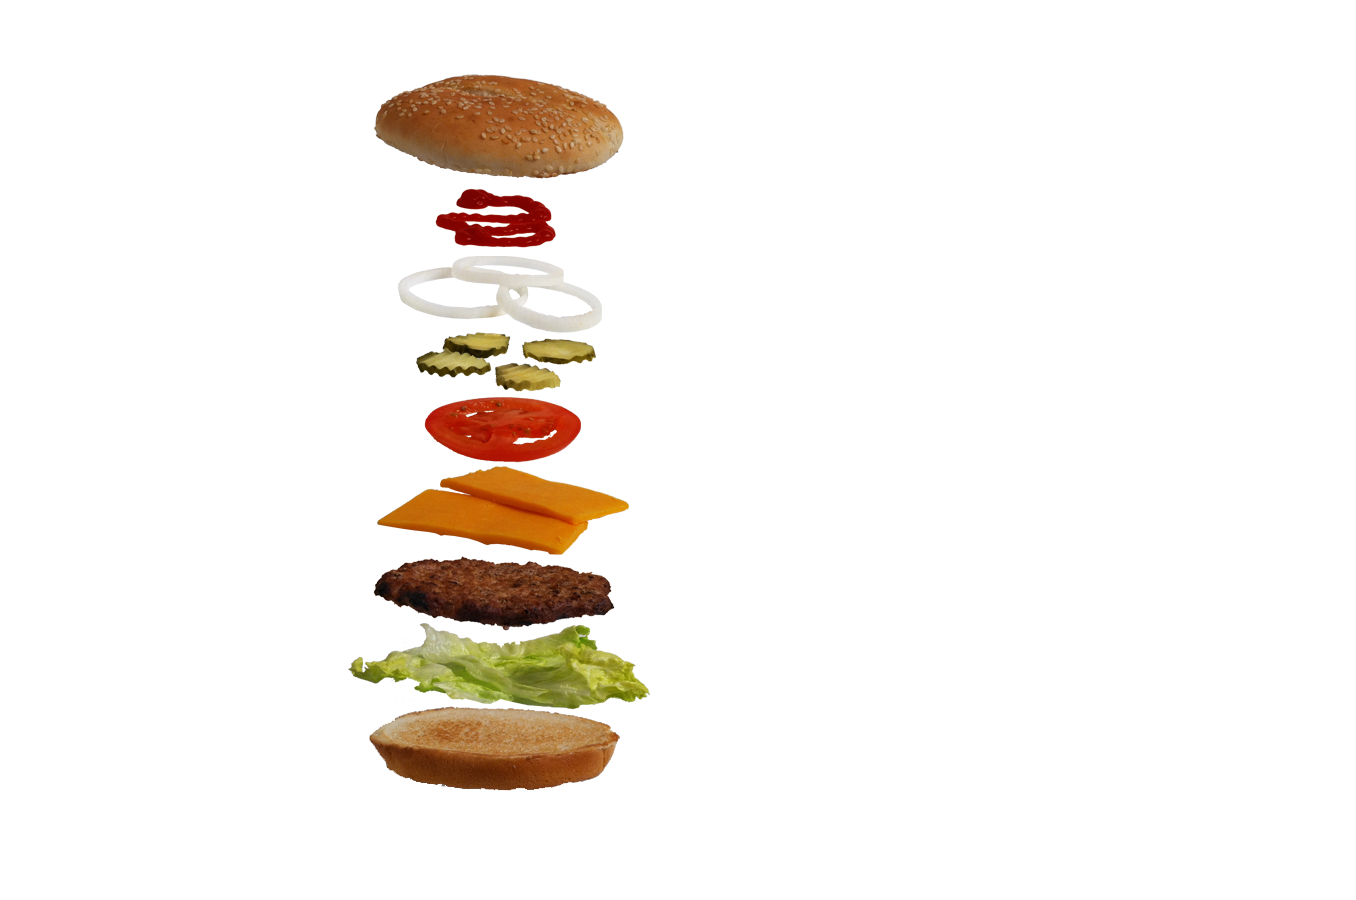 burger_loose_scaled_obj_as_seen_in_layers_but_flat.png